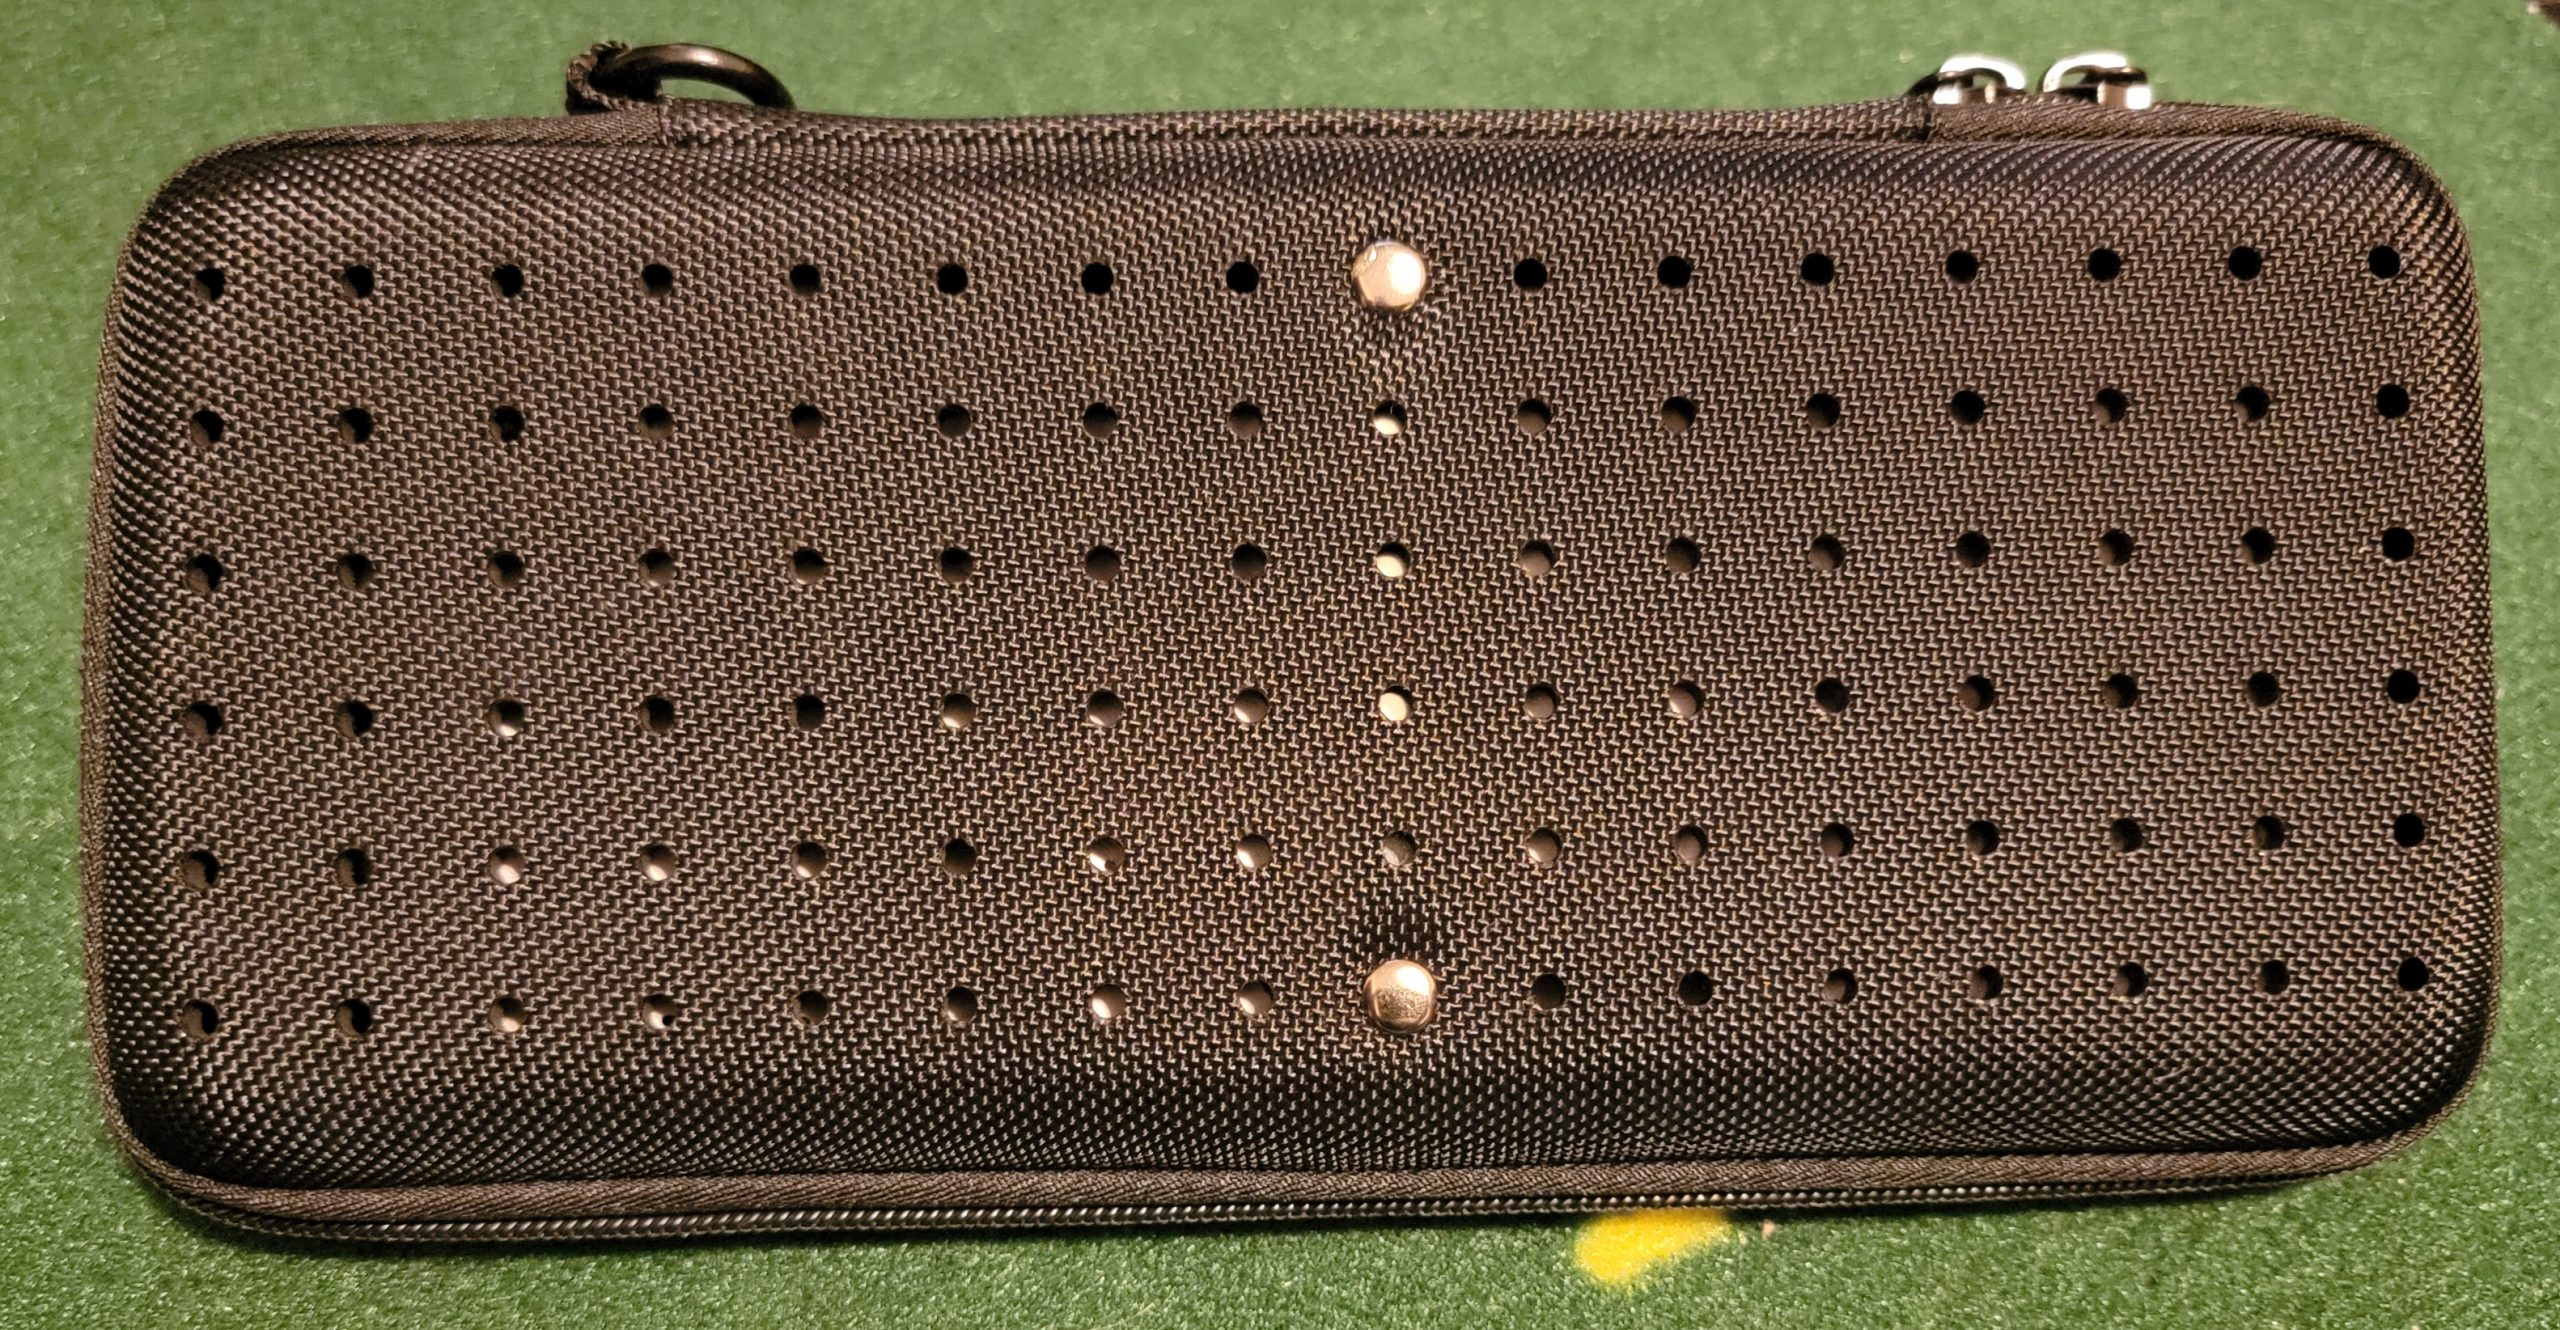 Old Duffer Golf image of the back side of a golf accessories case